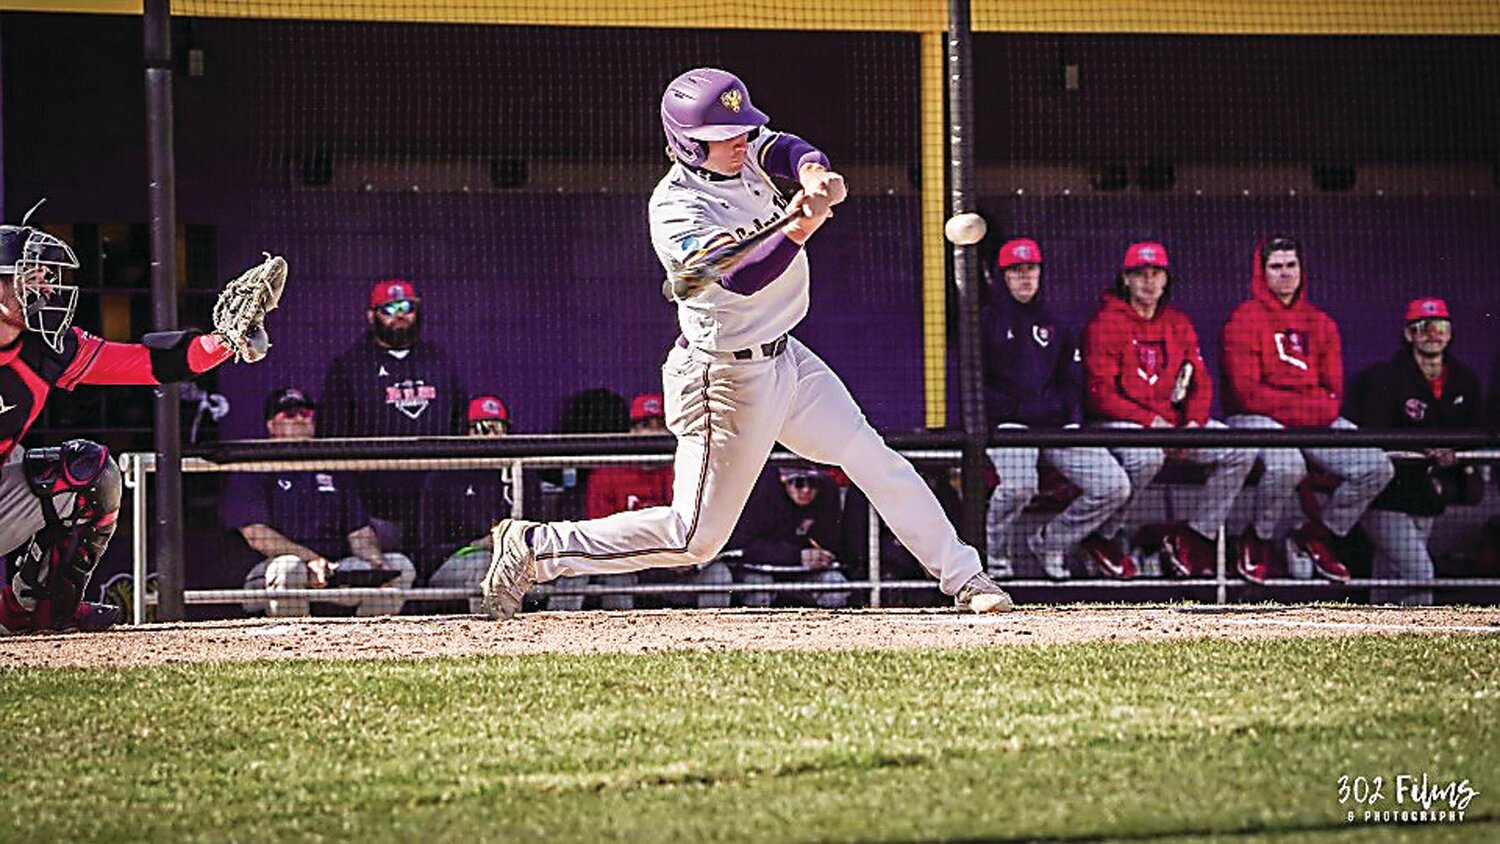 West Chester University’s Joe Kaleck, a graduate of Neshaminy High School, batted .322 during the 2023 season and was named first team All-PSAC East.